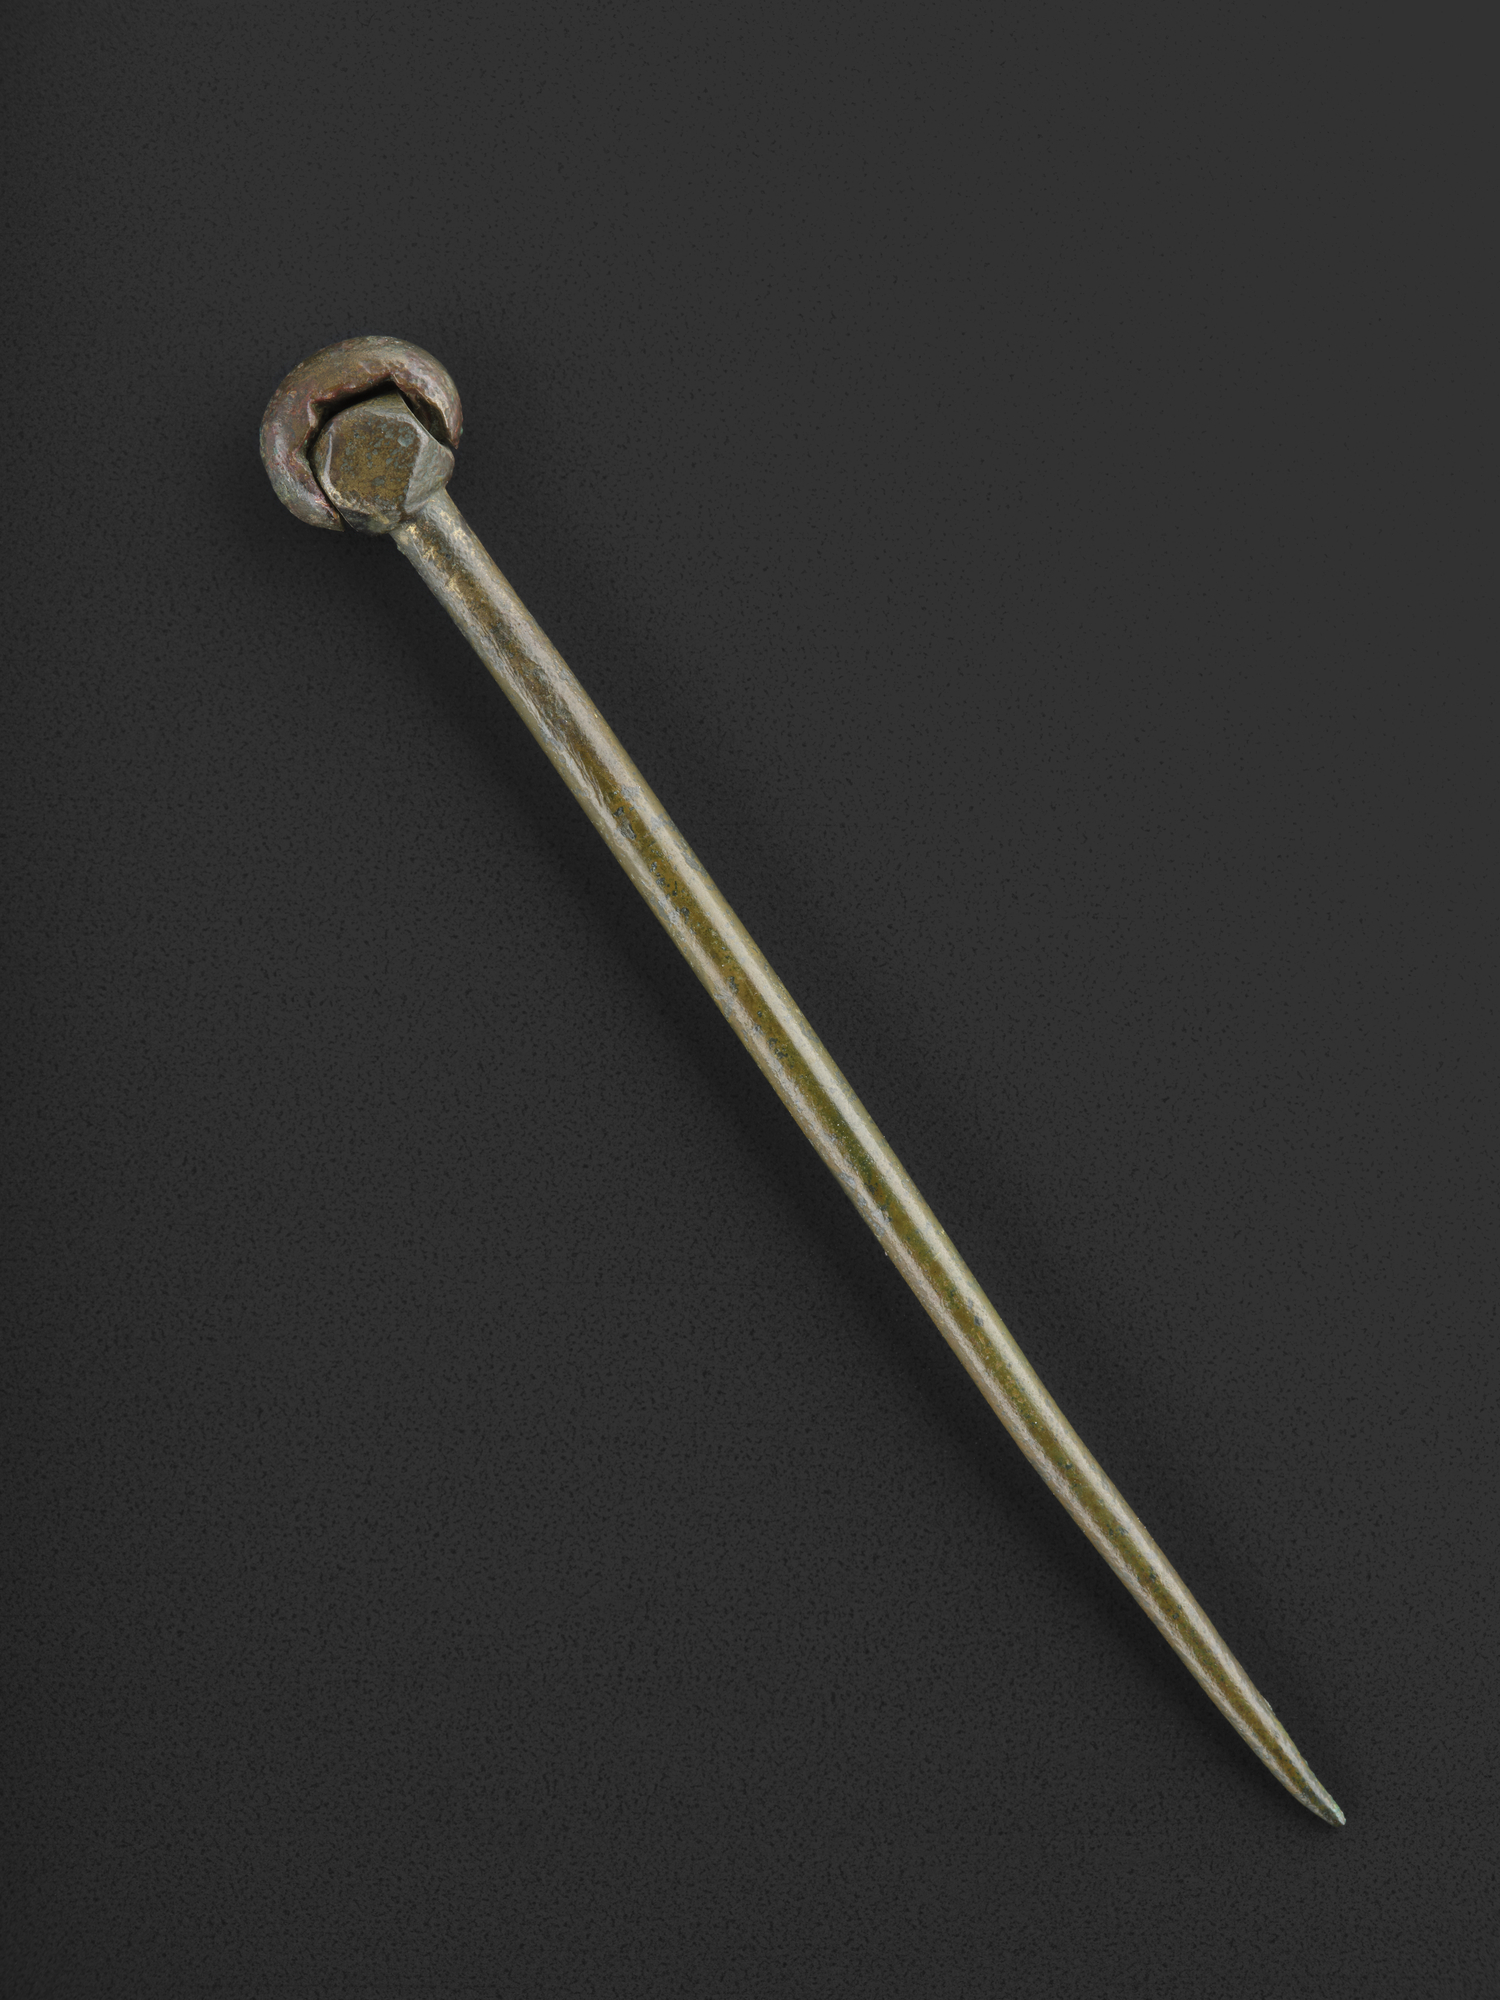 Image of Pin, from unknown location © National Museums Scotland